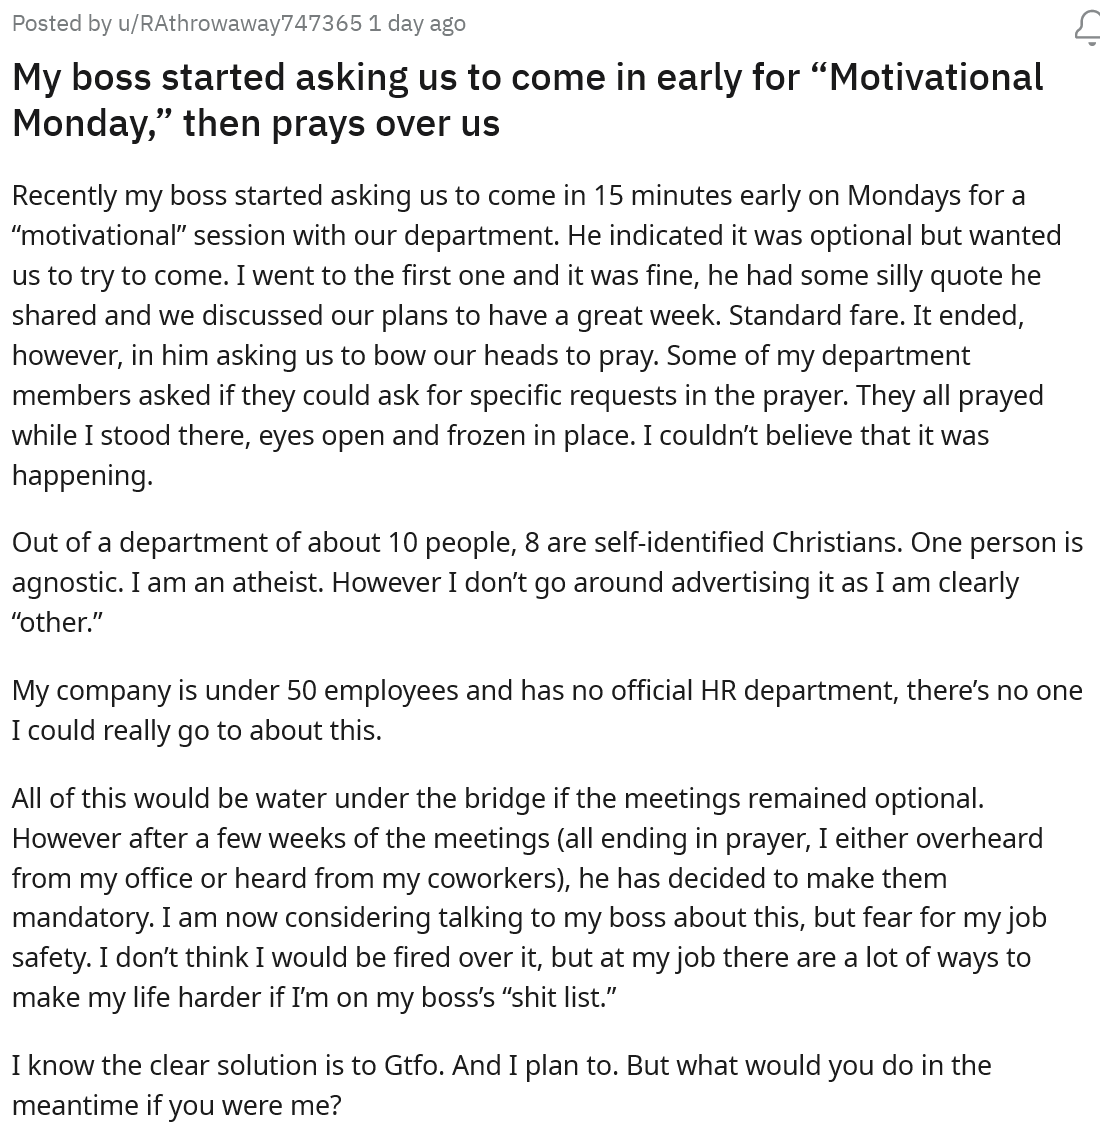 Boss Demands Employees Arrive Early For 'Motivational Mondays' So He Can Pray Over Them